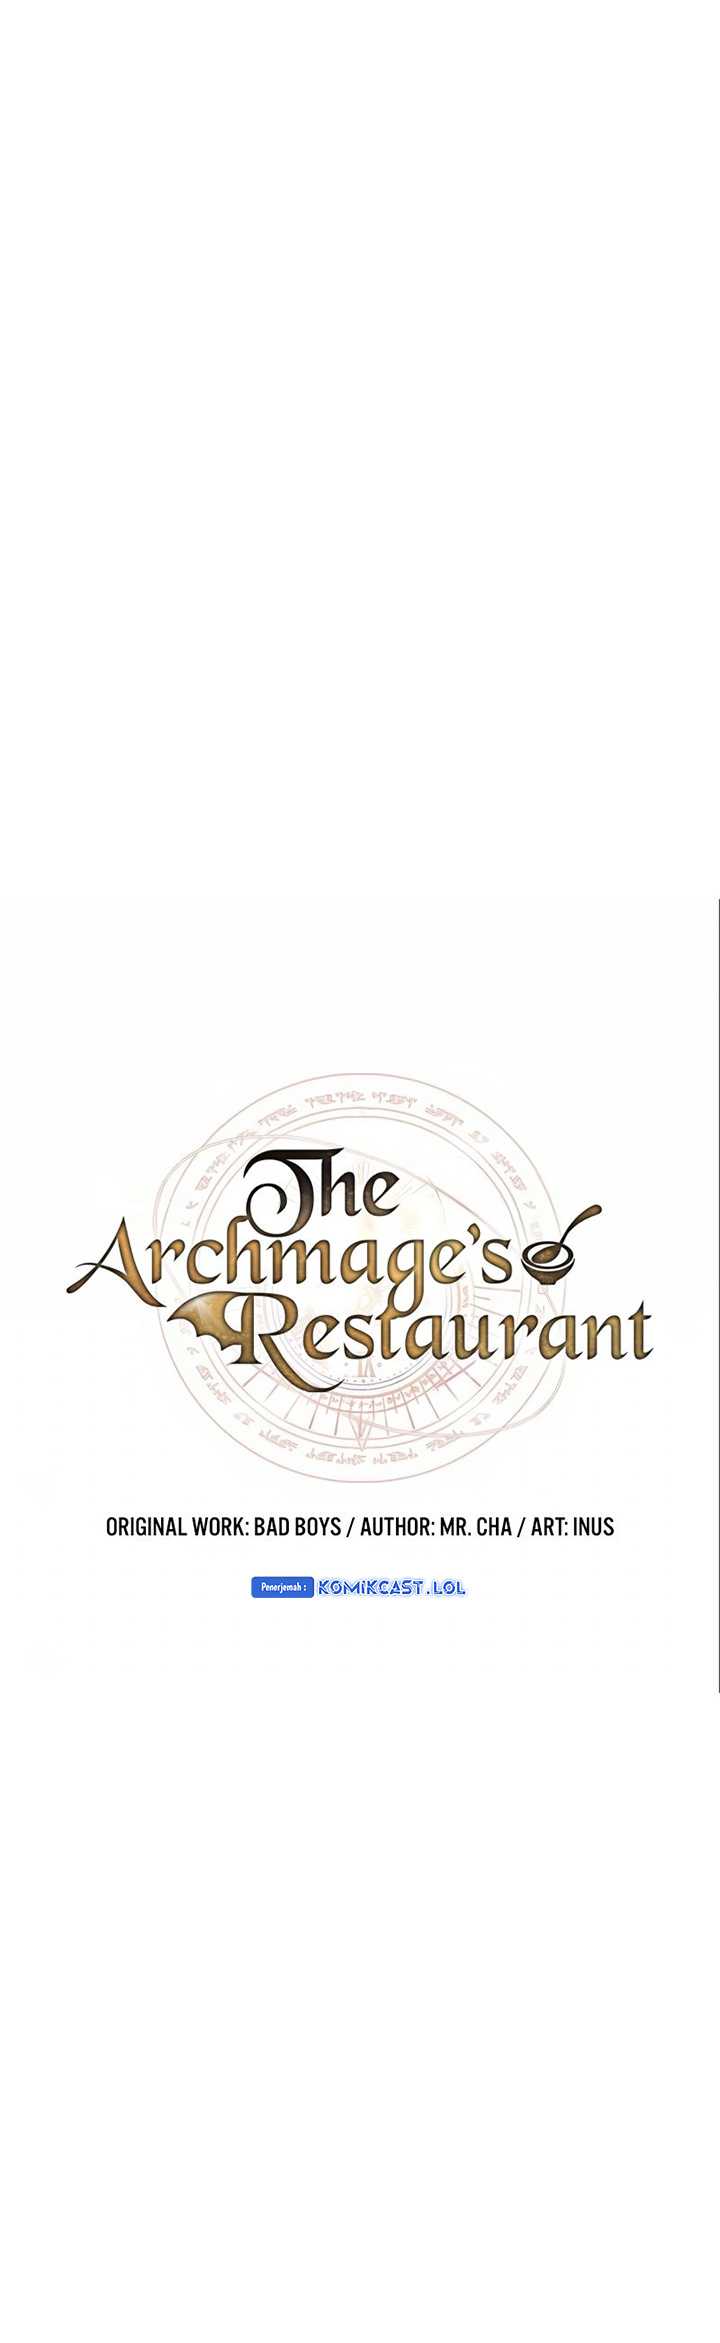 Archmage Restaurant Chapter 23